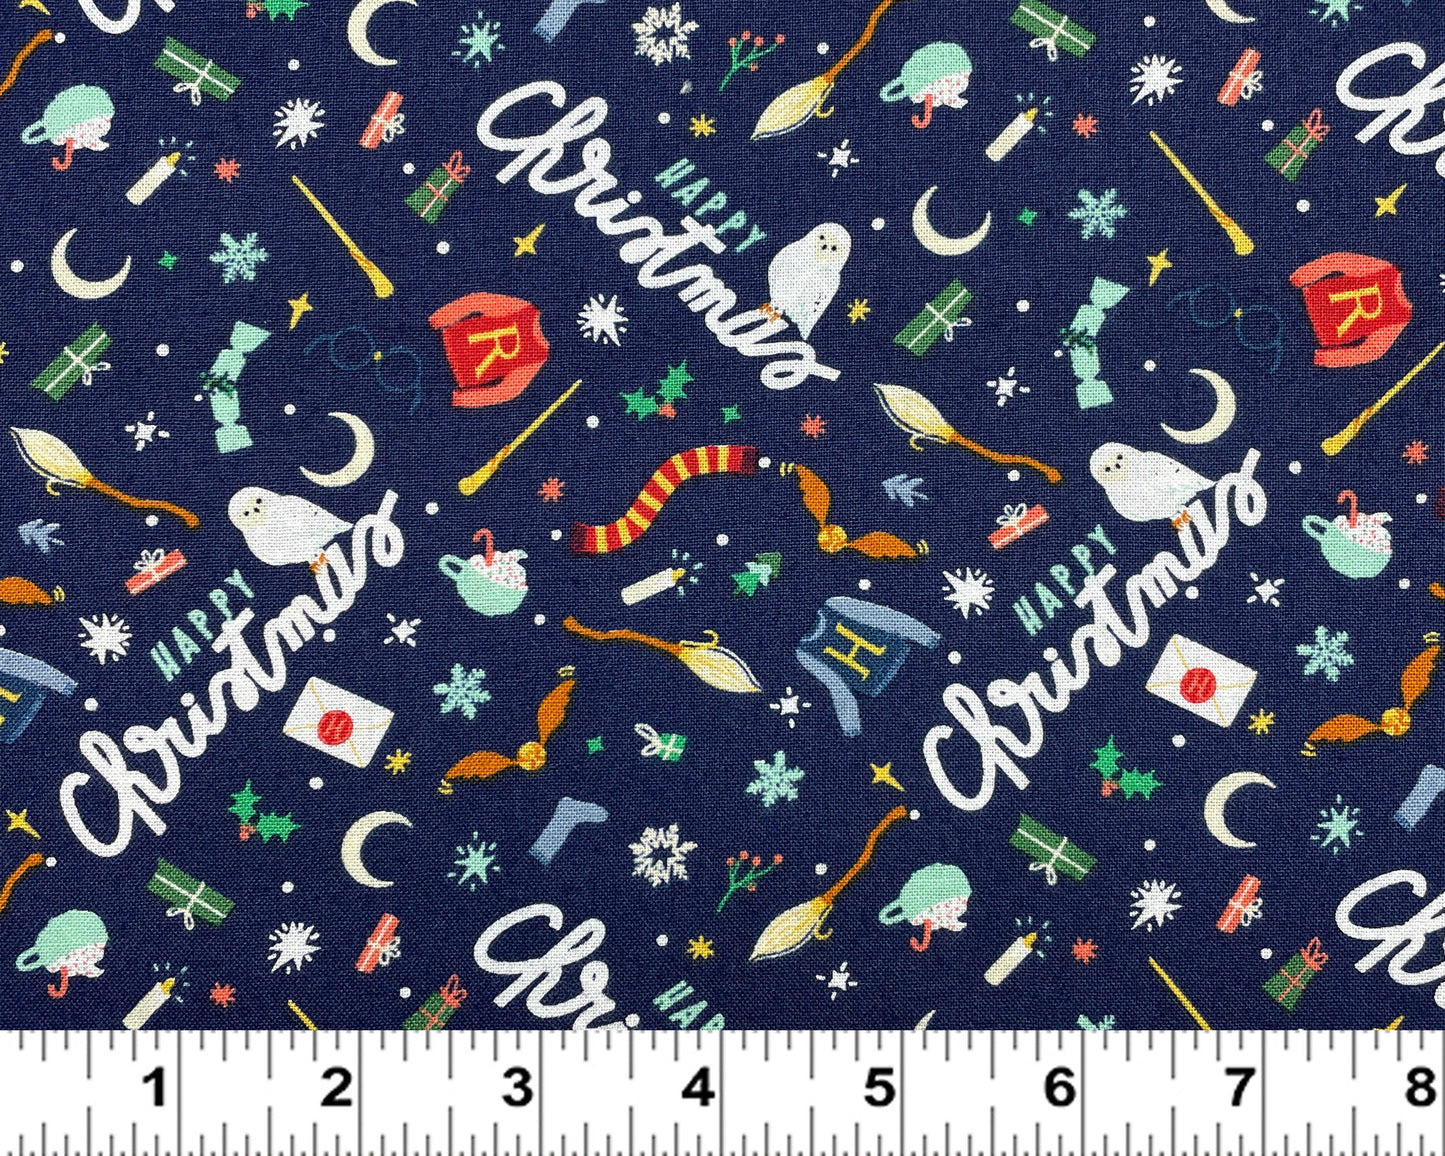 Harry Potter Christmas Fabric by the yard - Happy Christmas - 100% cotton - Camelot Fabrics - Character Winter Holiday III - Ships NEXT DAY